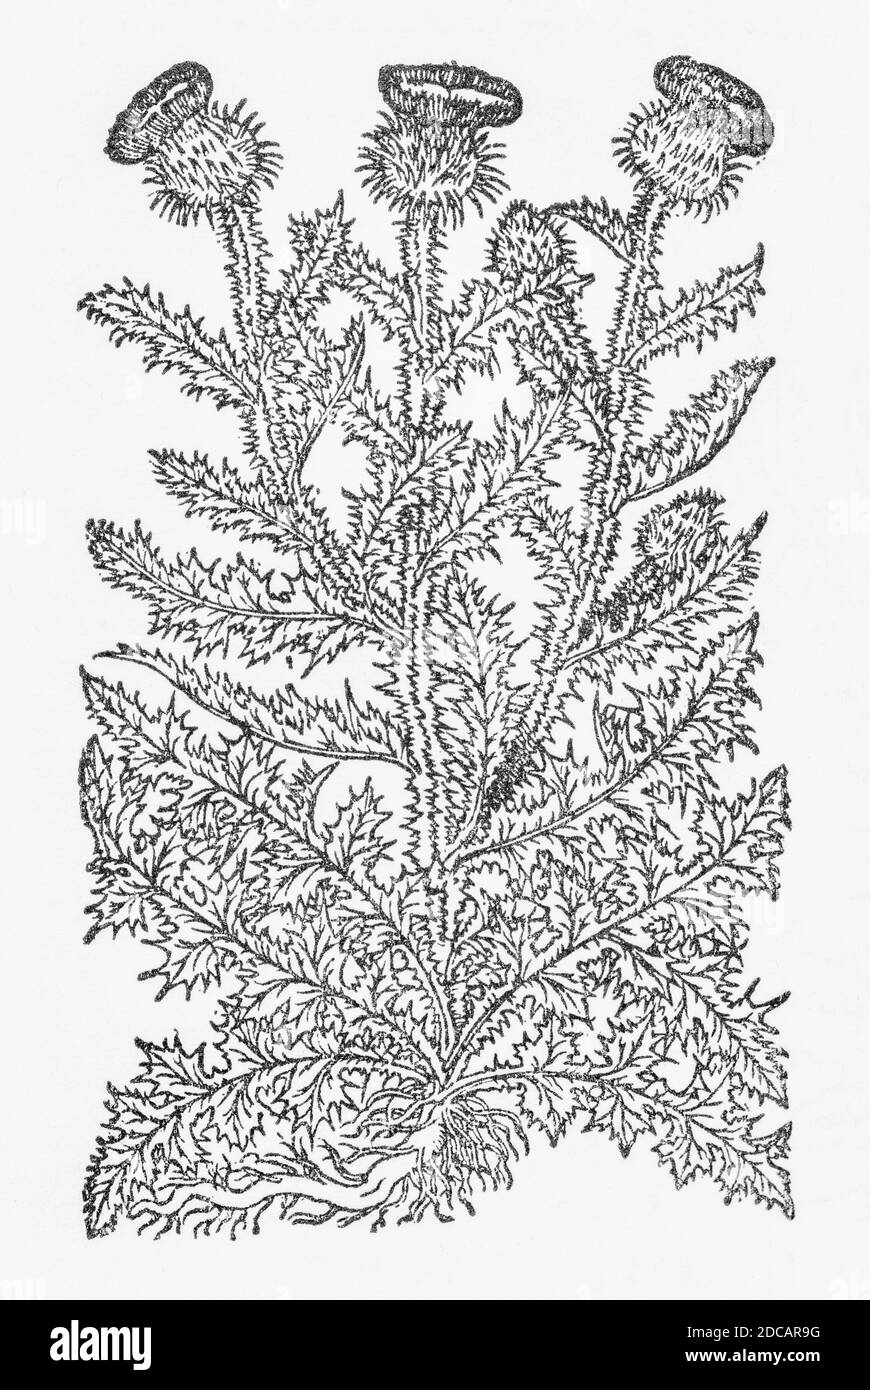 Scotch Thistle / Onopordum acanthium woodcut from Gerarde's Herball, History of Plants. Refers as The white cotton Thistle / Acanthium album. P988 Stock Photo